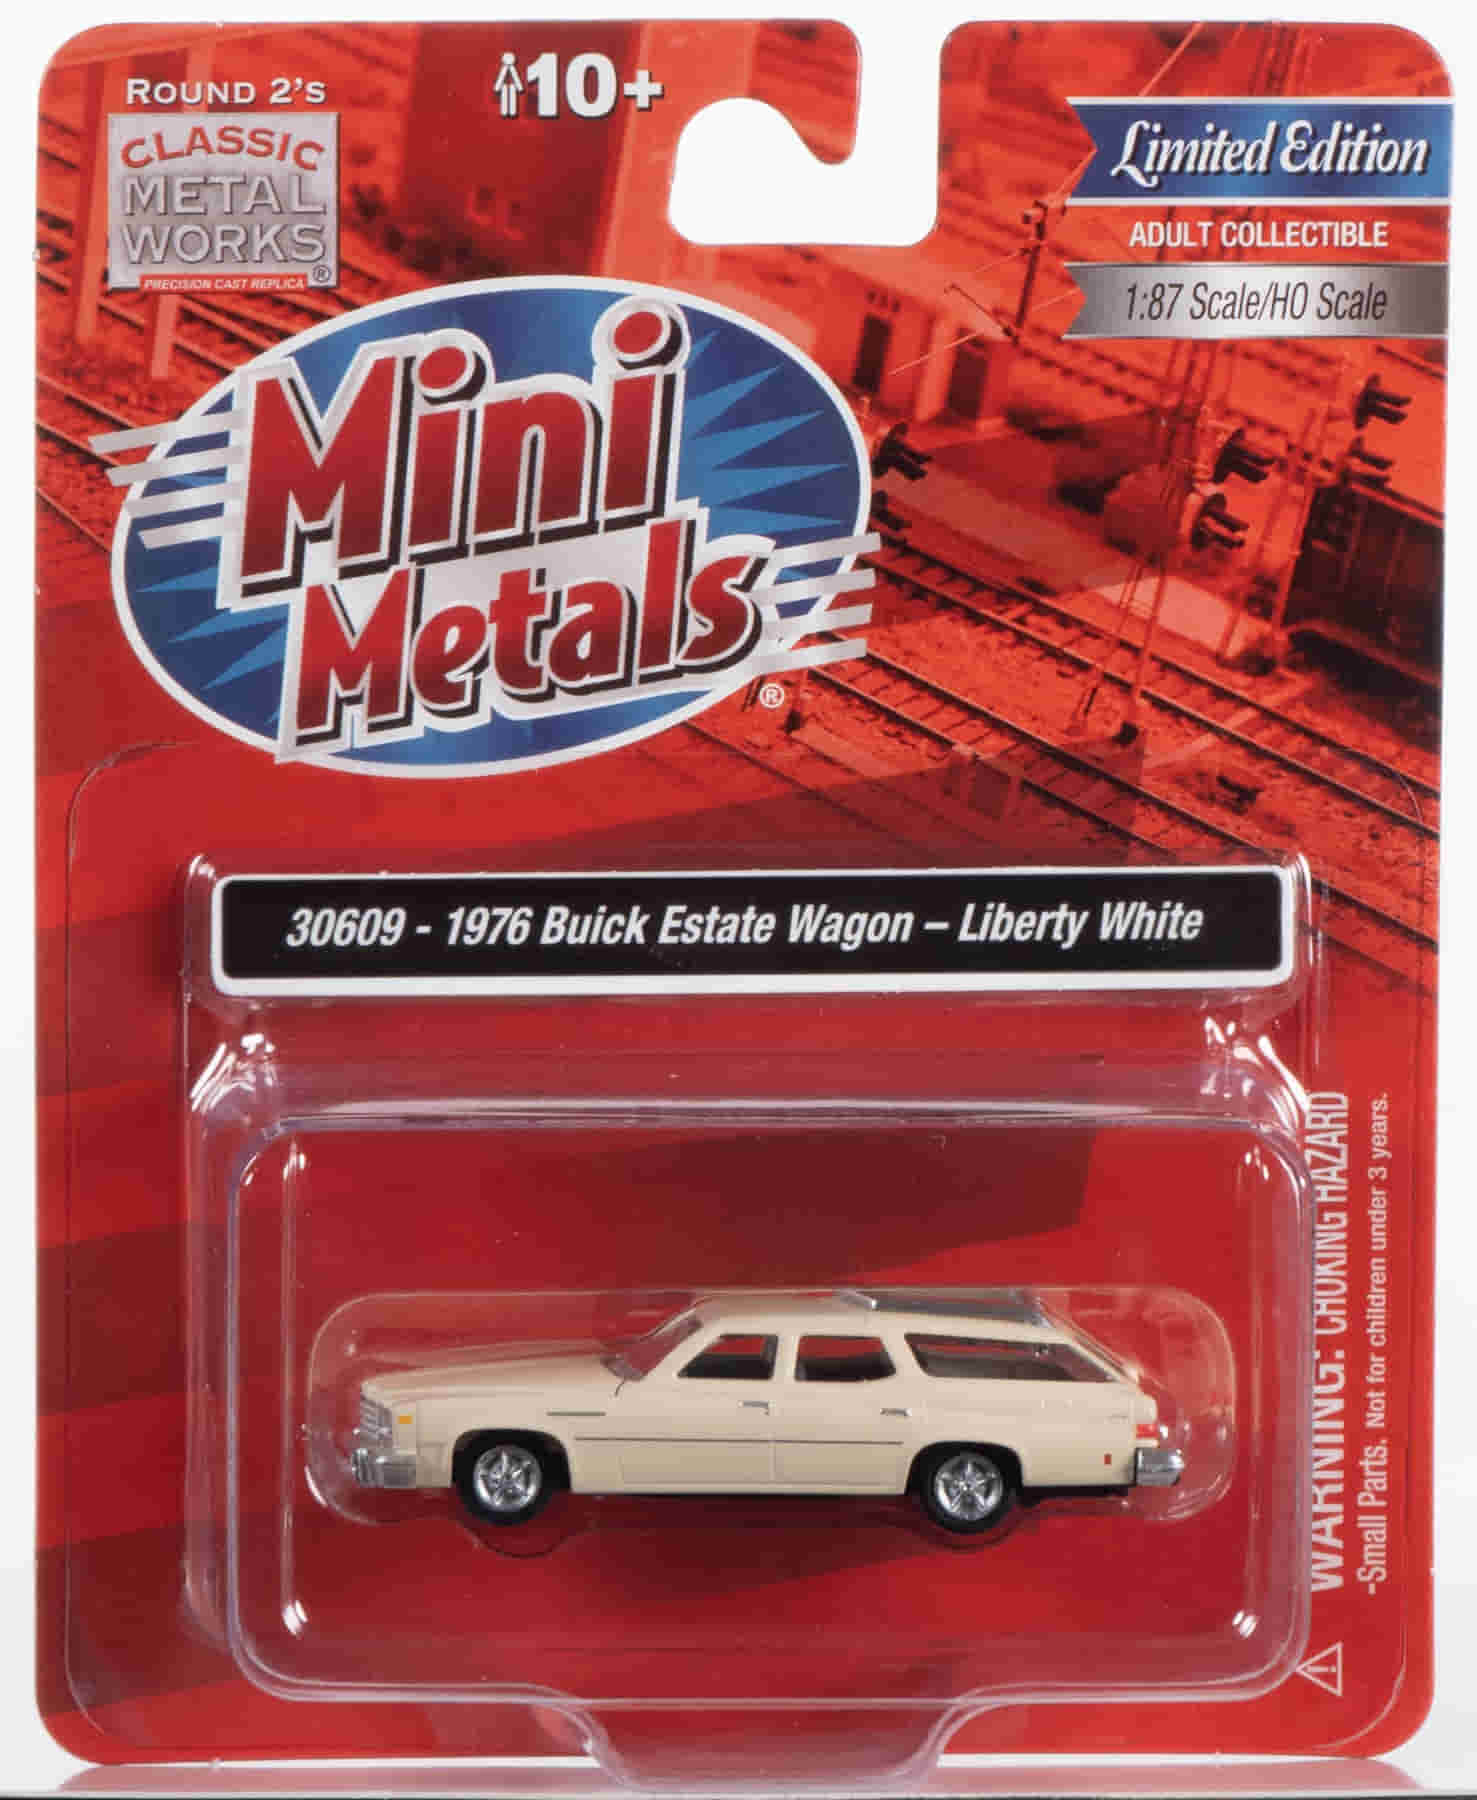 Classic Metal Works 1976 Buick Estate Wagon (Liberty White) 1:87 HO Scale